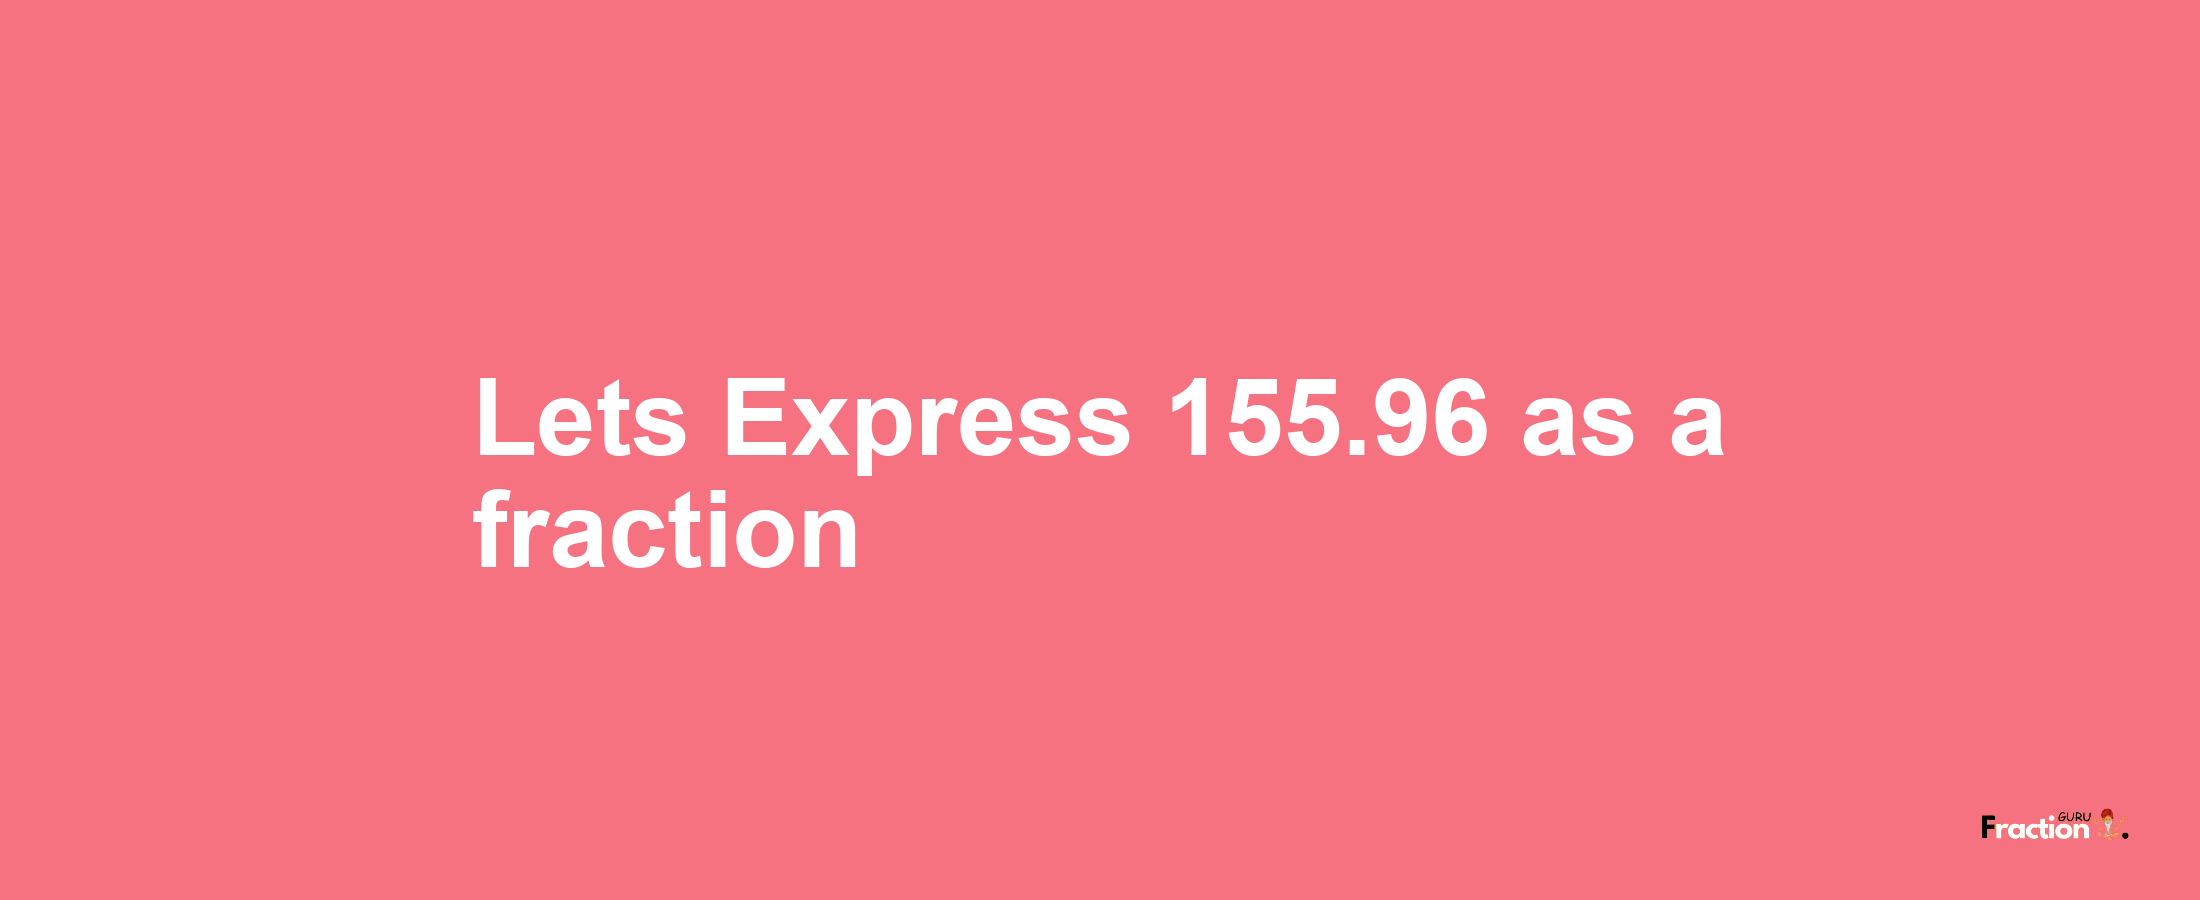 Lets Express 155.96 as afraction